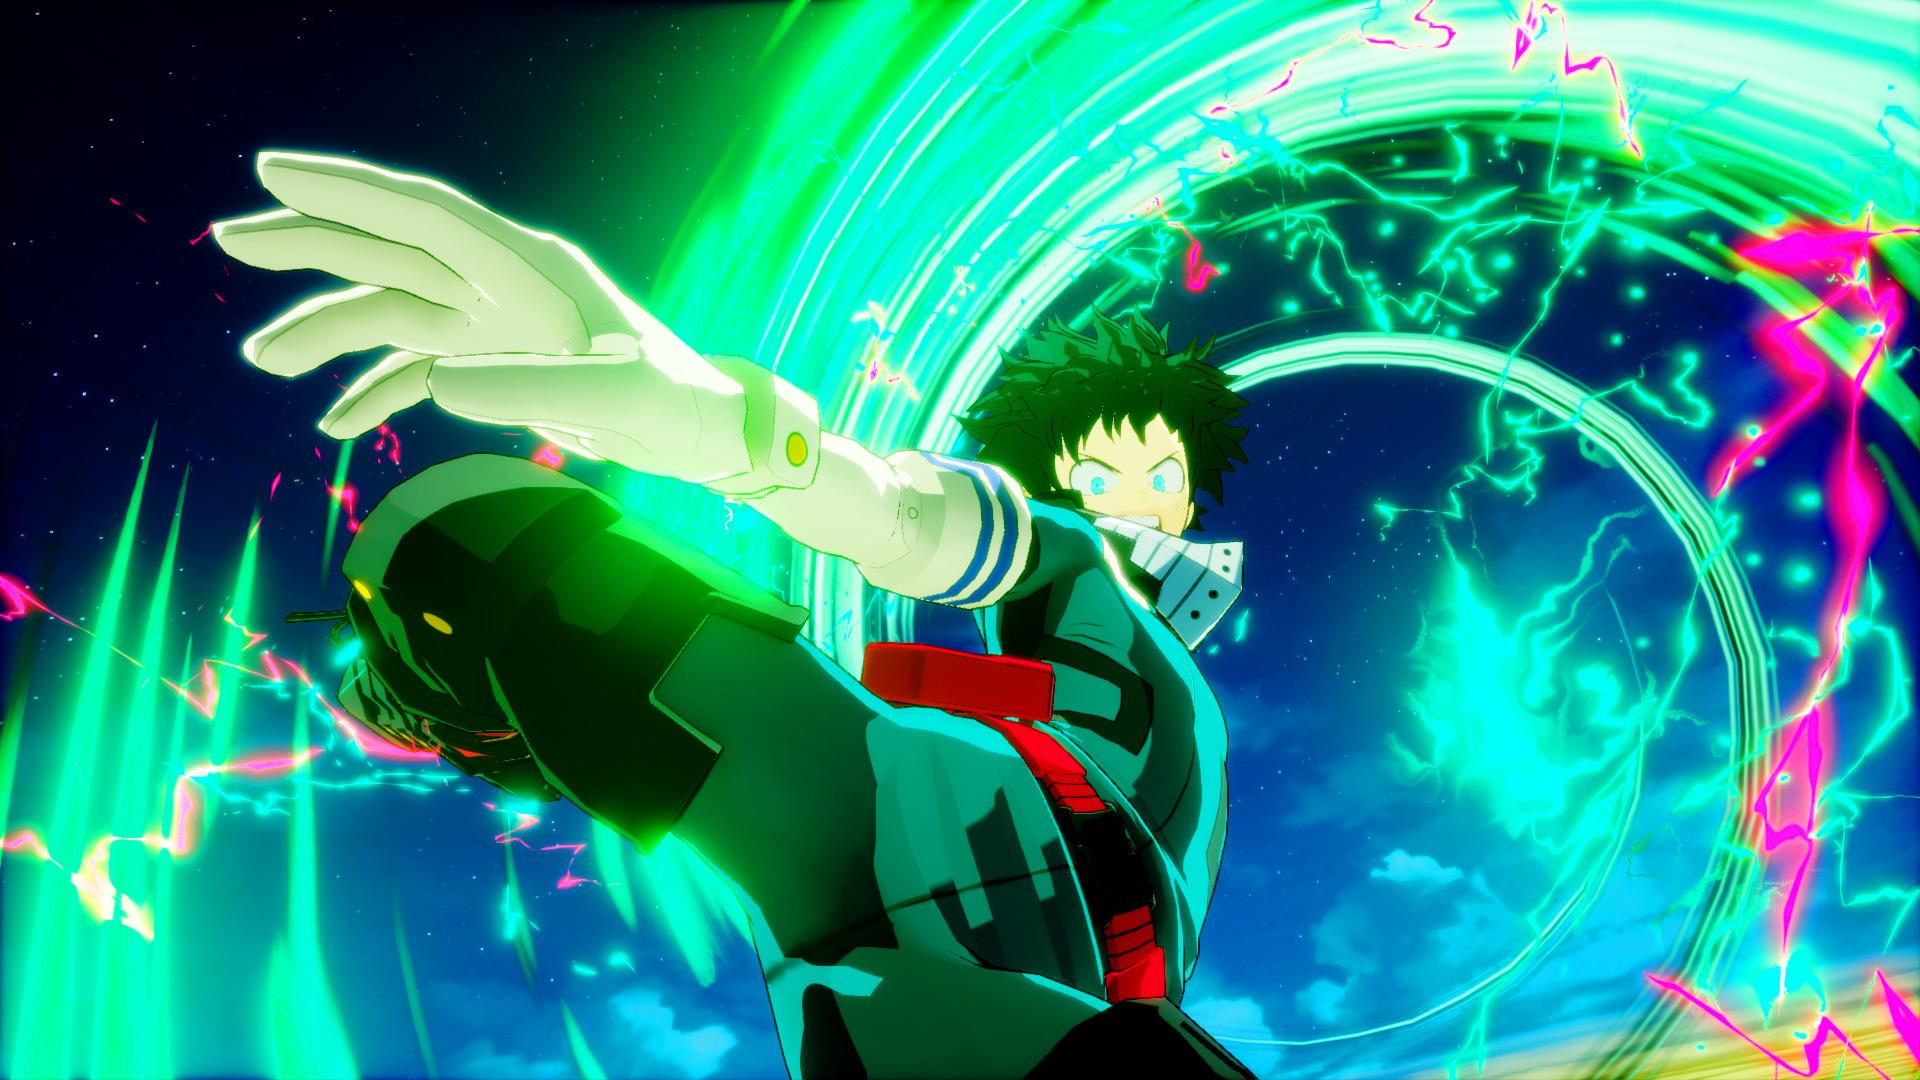 Kick villains into touch with Deku's new fighting style